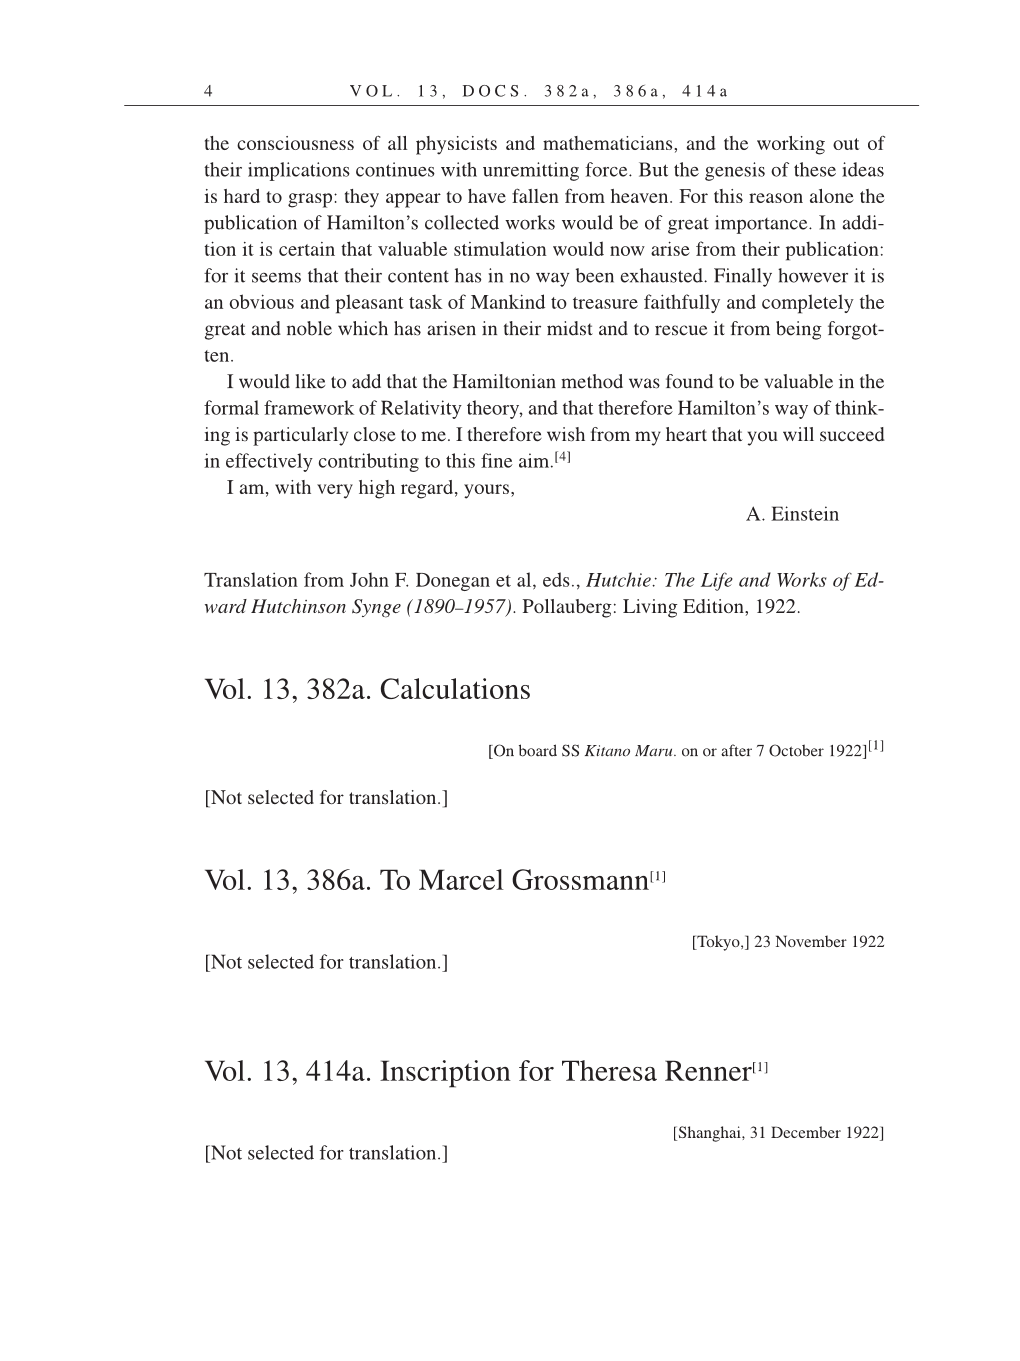 Volume 14: The Berlin Years: Writings & Correspondence, April 1923-May 1925 (English Translation Supplement) page 4